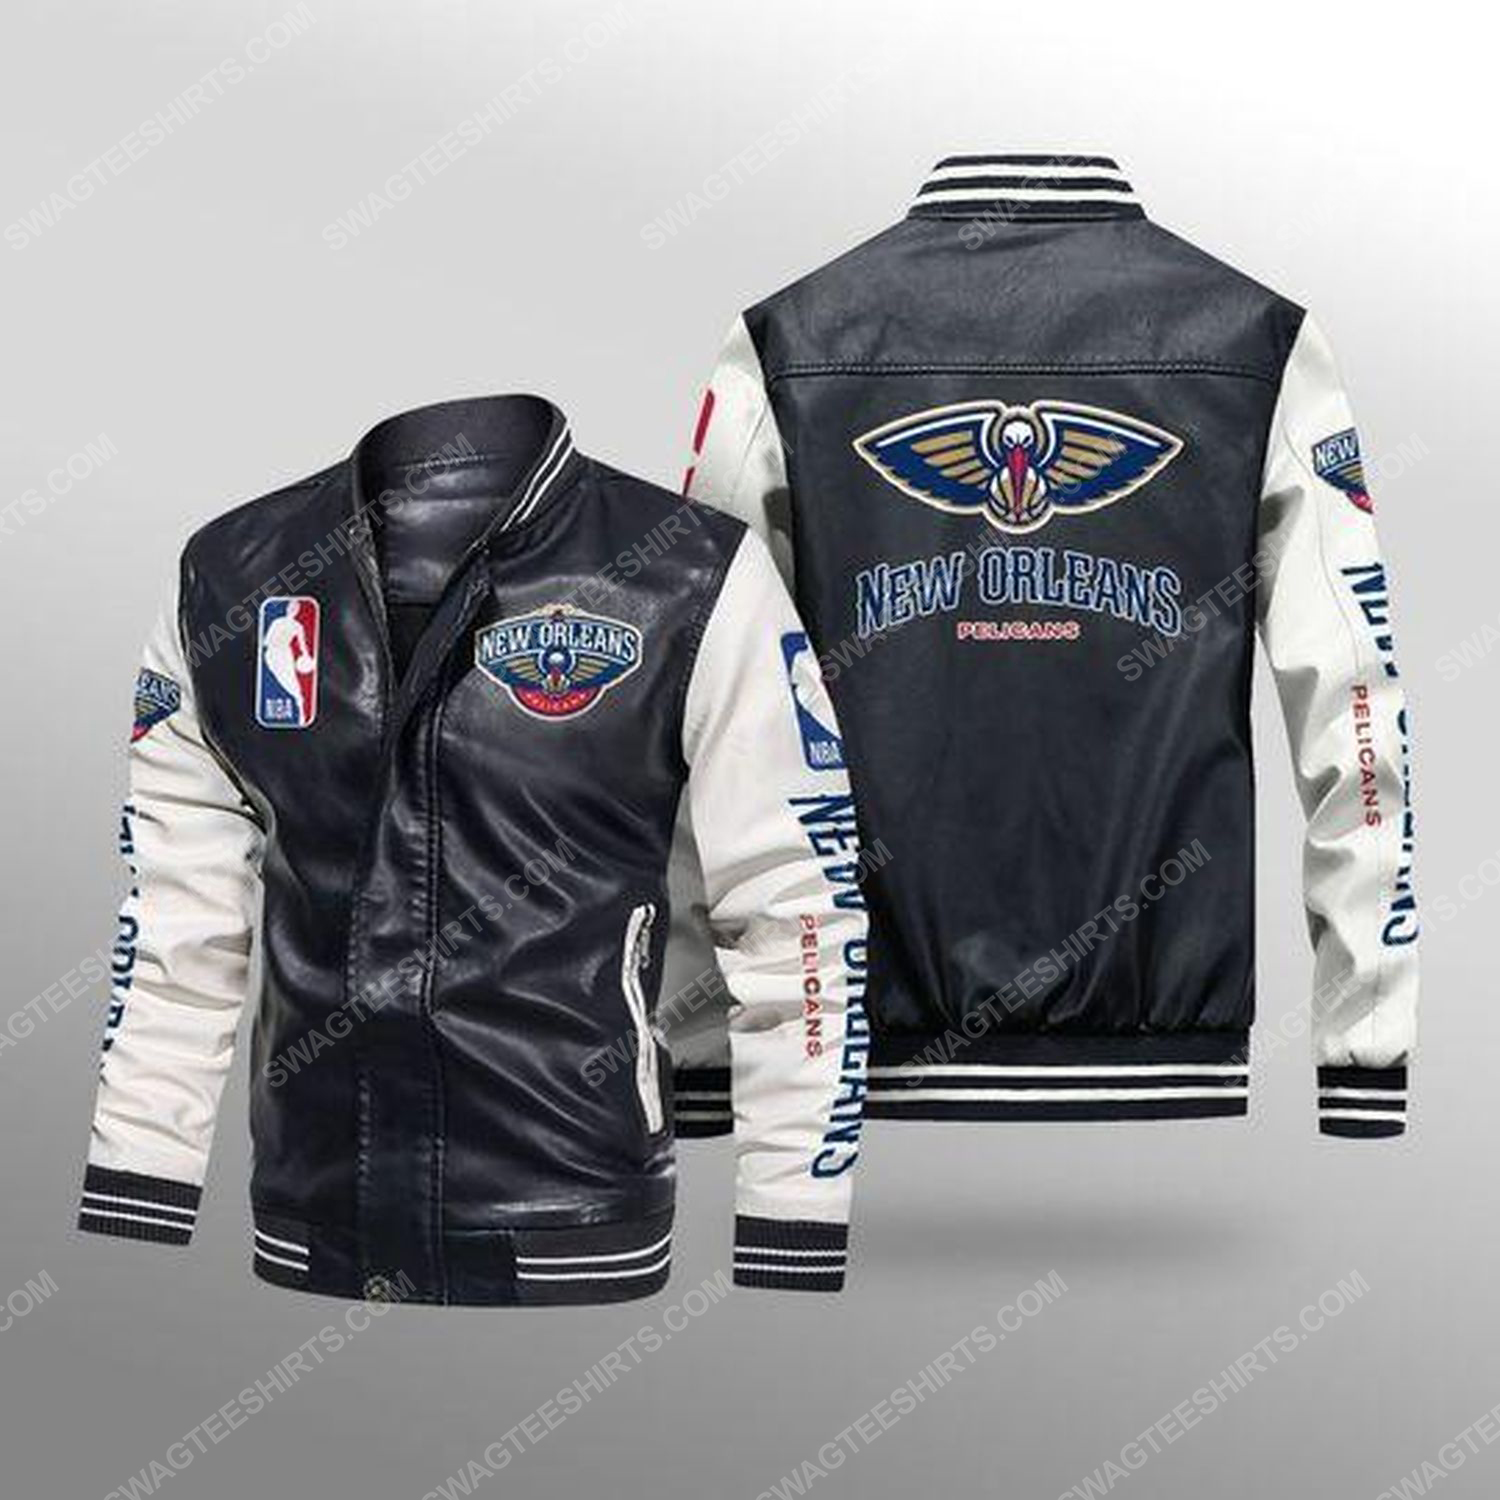 New orleans pelicans all over print leather bomber jacket - white